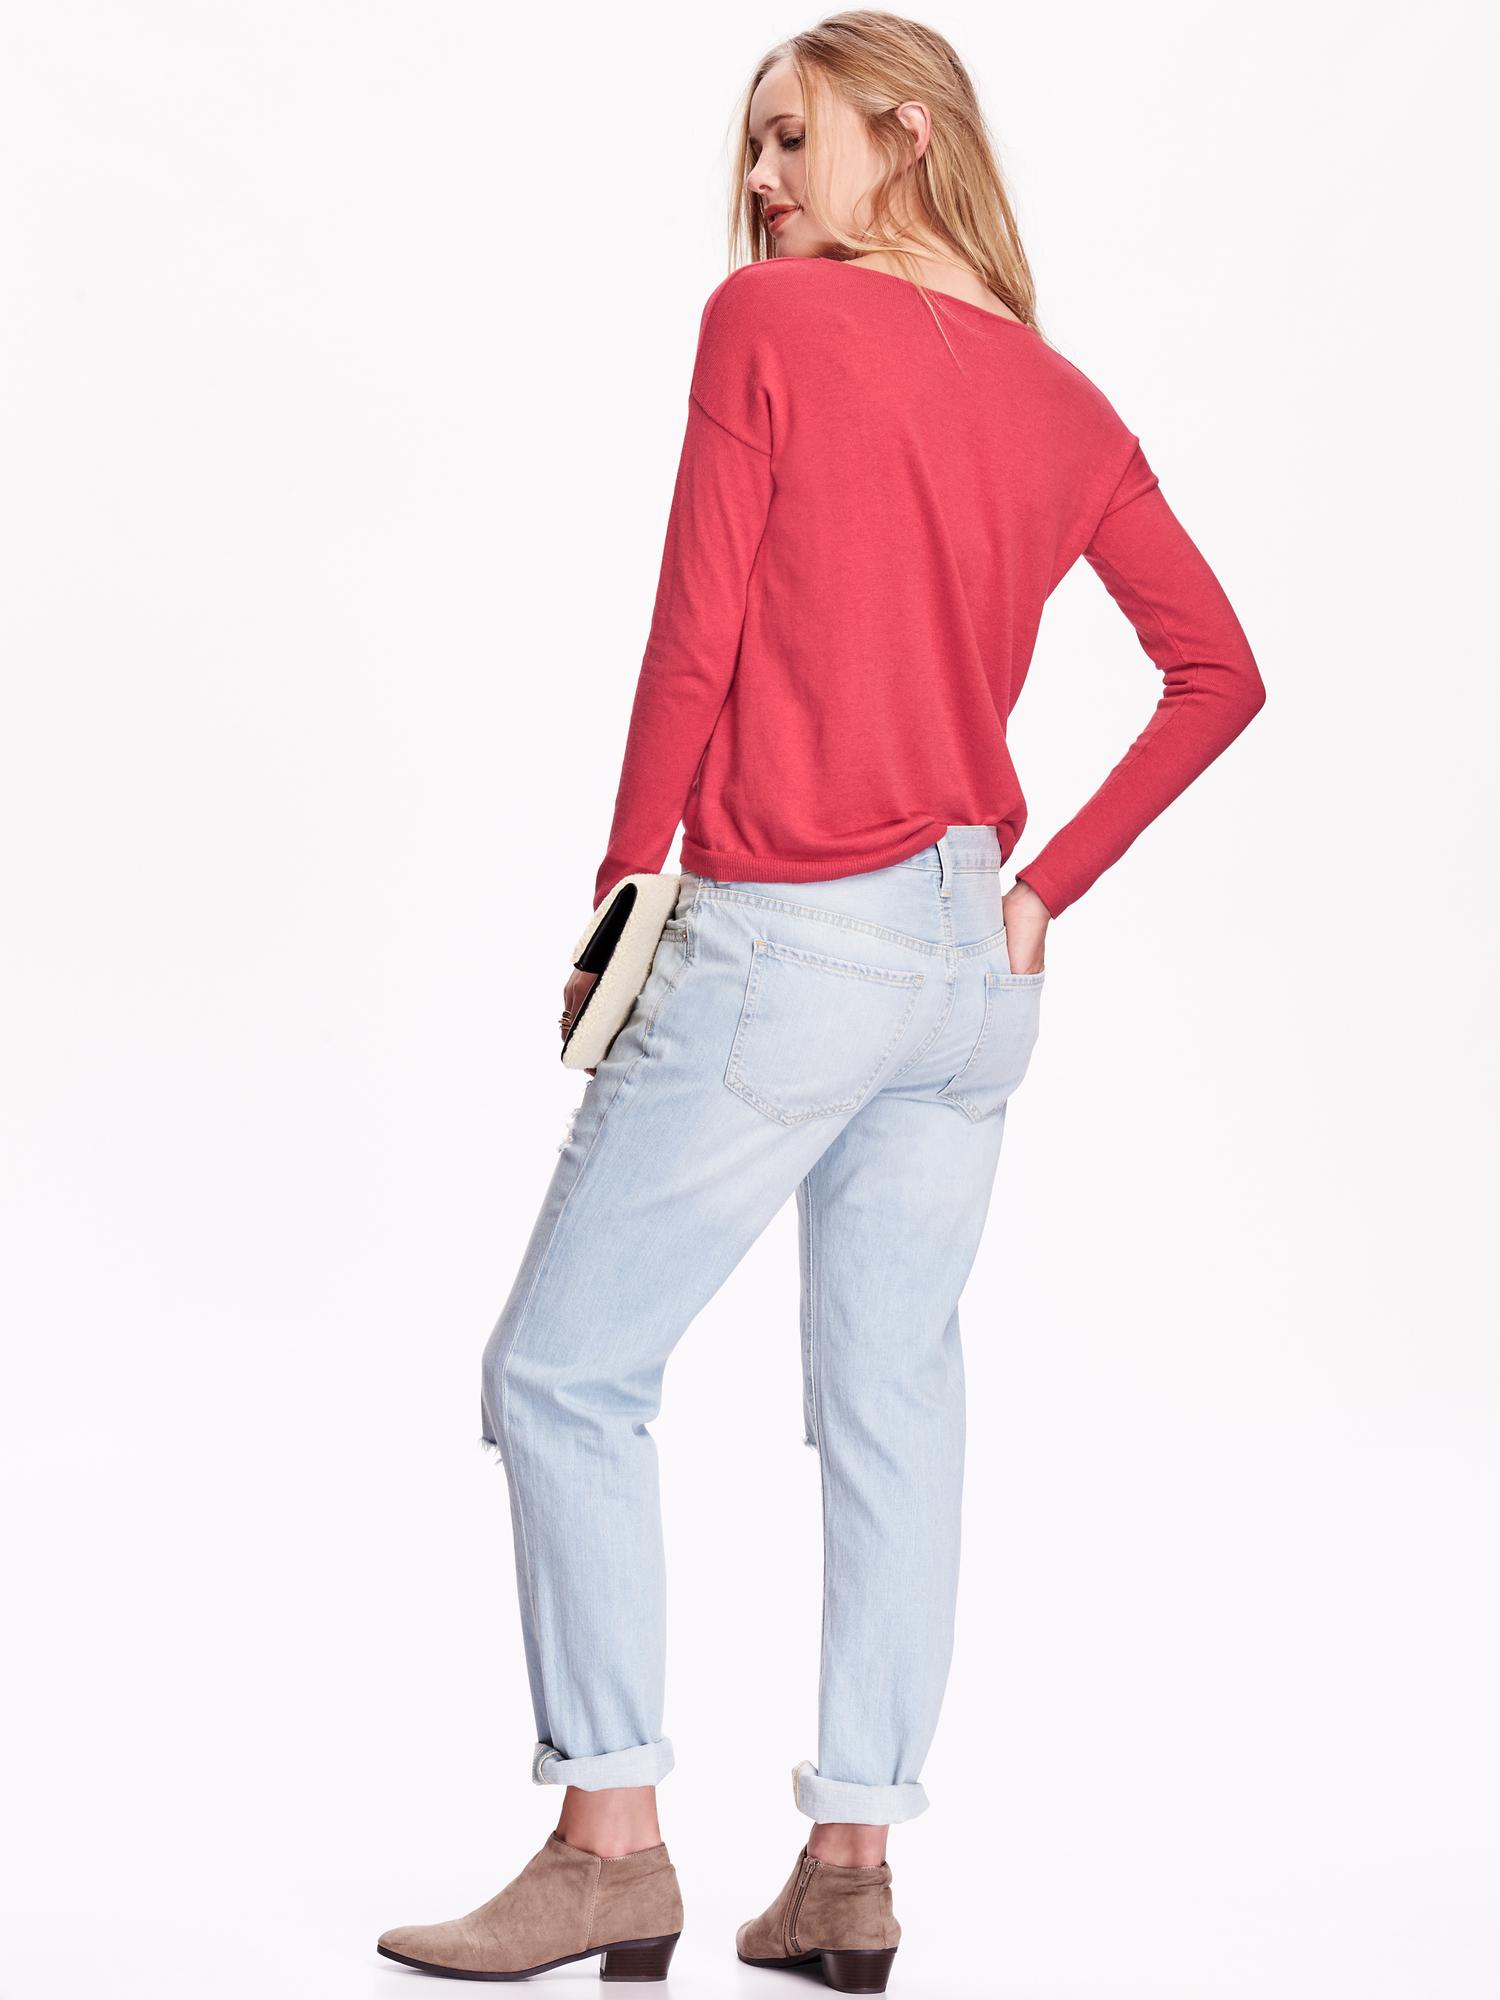 Women's Boatneck Sweater | Old Navy